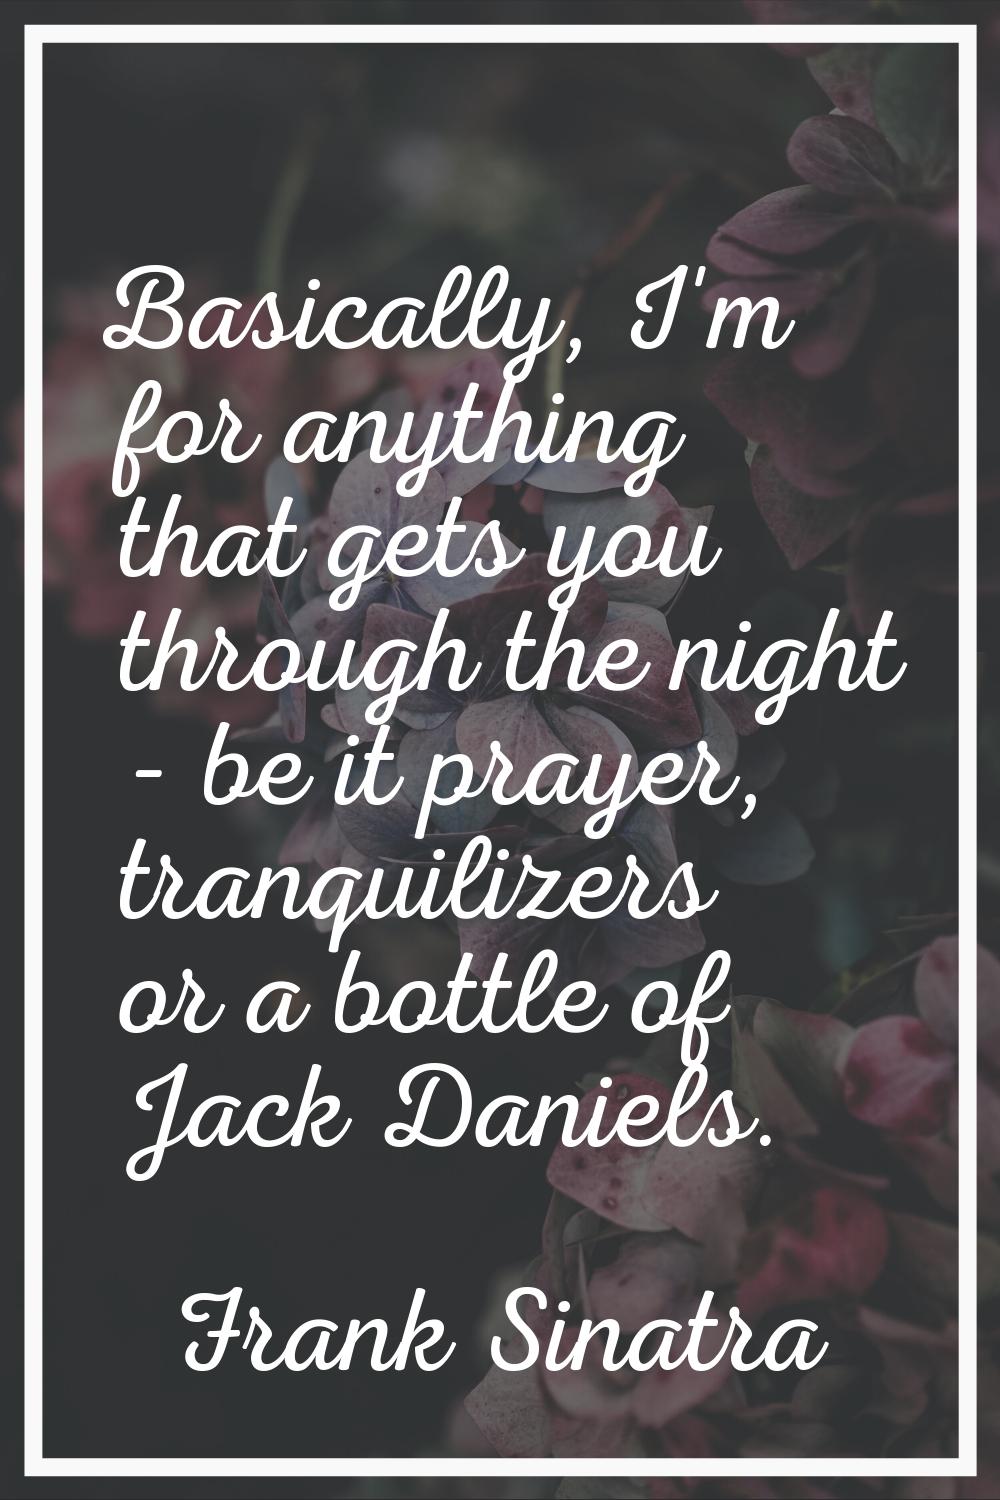 Basically, I'm for anything that gets you through the night - be it prayer, tranquilizers or a bott